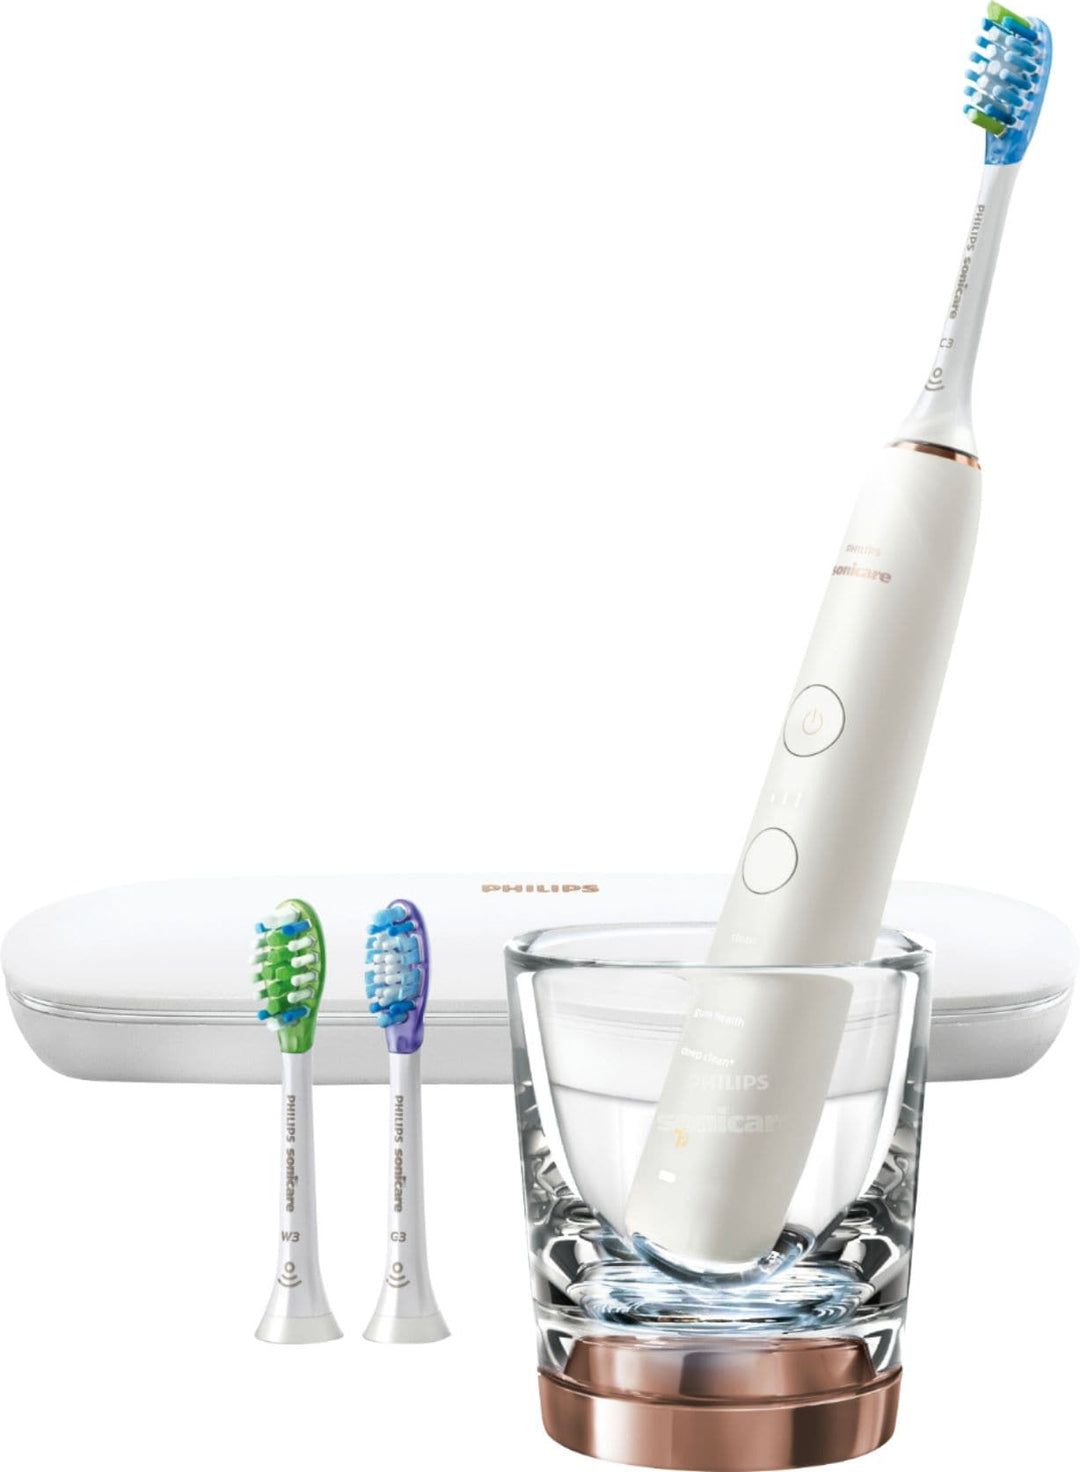 Philips Sonicare - DiamondClean Smart 9300 Rechargeable Toothbrush - Rose Gold_2